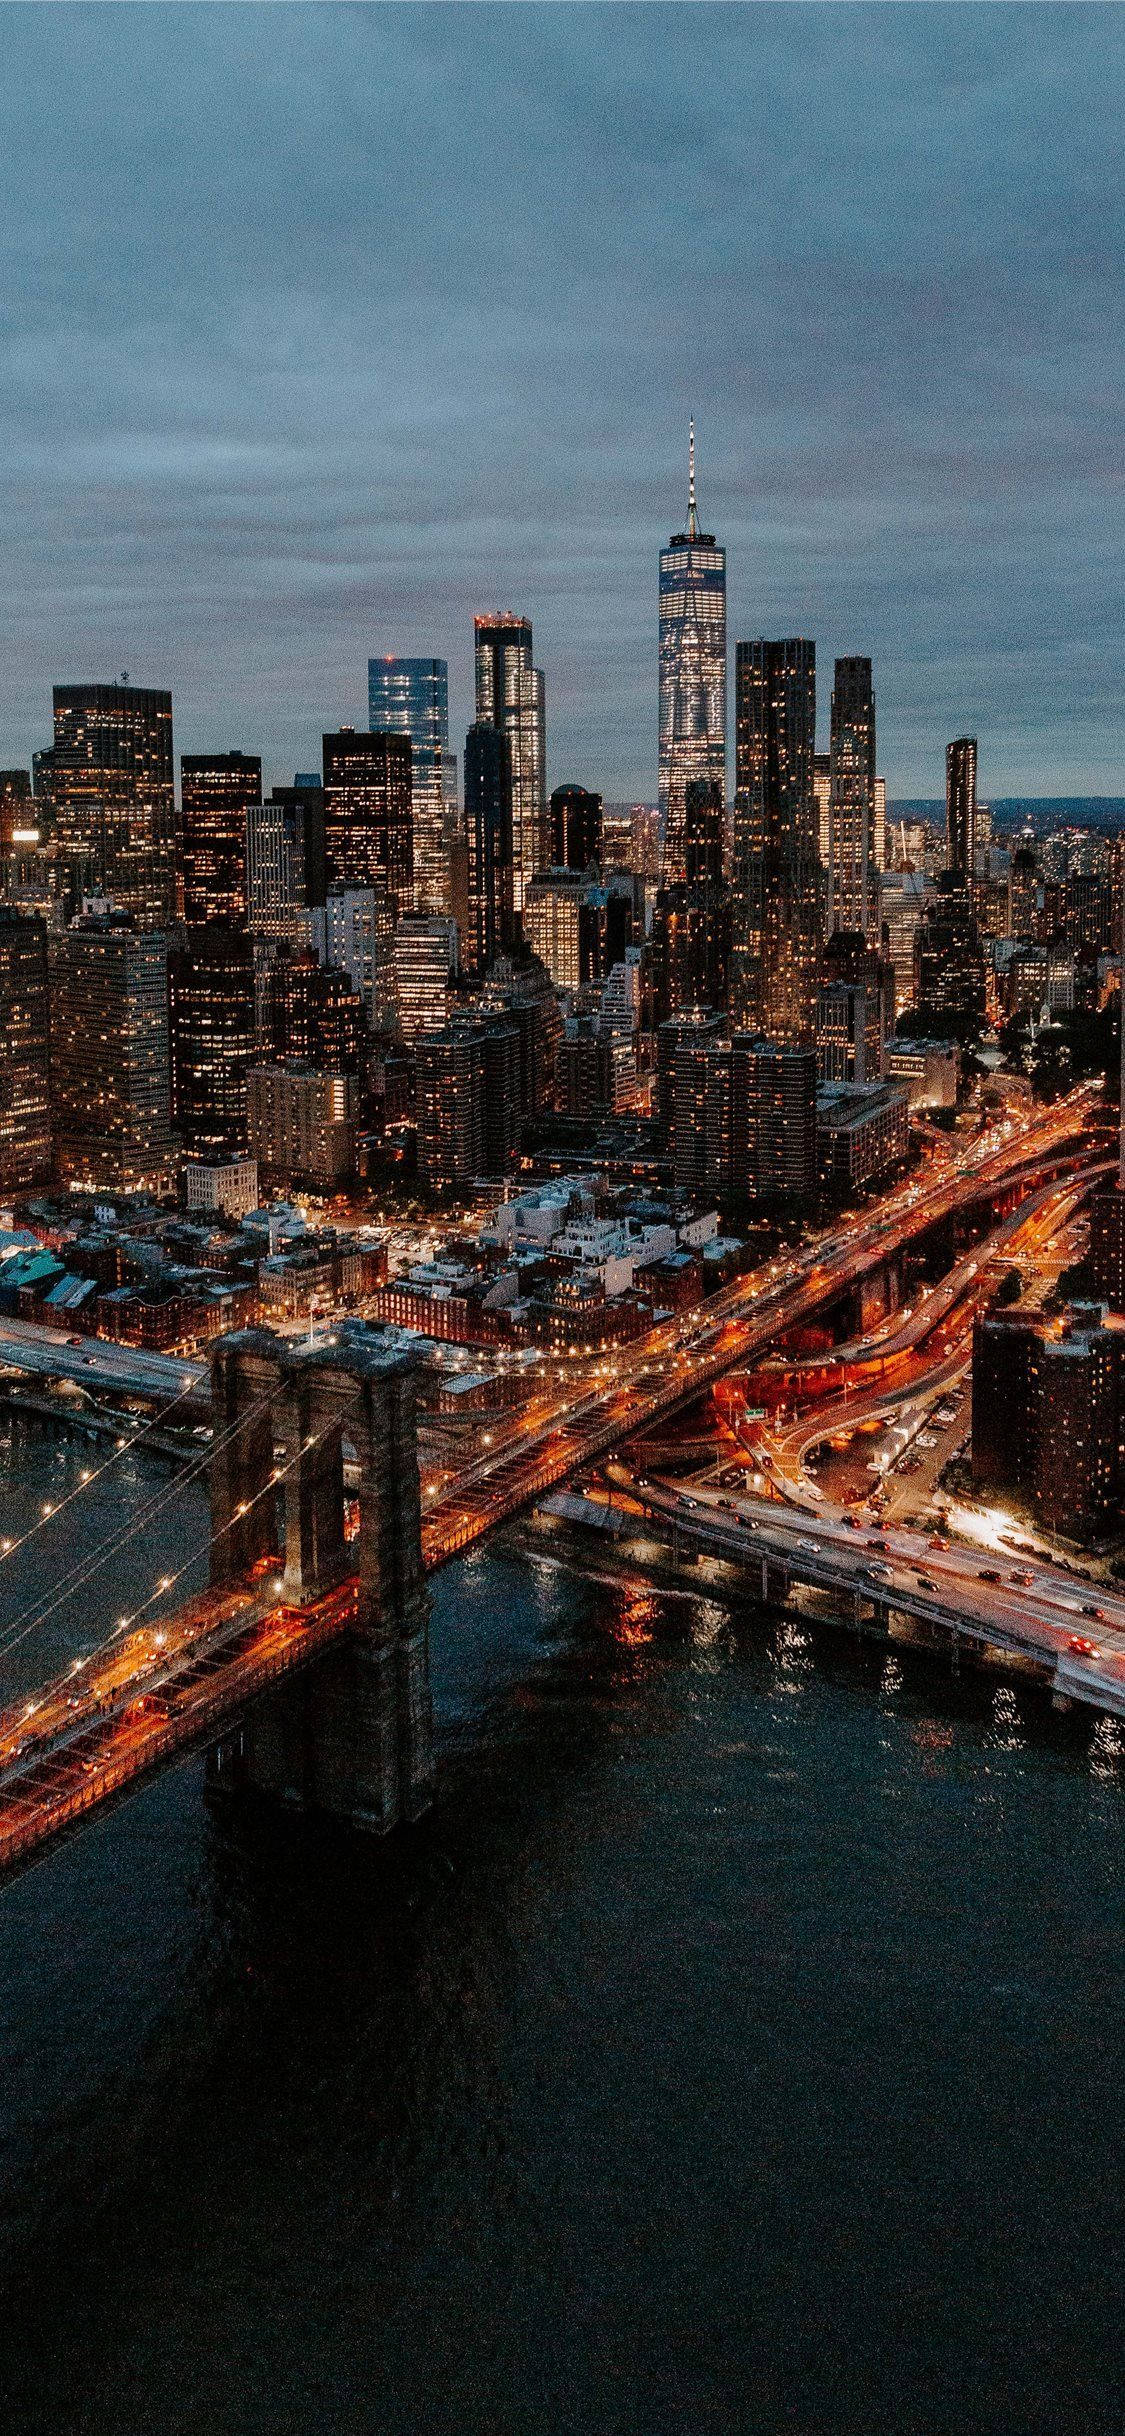 Download wallpaper Brooklyn Bridge, New York, night, city, aerial view, lights, 1125x2436 for iPhone 11, iPhone 11 Pro, iPhone 11 Pro Max, 5K, 4K, iPhone XS, iPhone XS Max, iPhone XR, 3D, iPhone X, iPhone Xs Max, iPhone 8, iPhone 8 Plus, iPhone 7, iPhone 7 Plus, 6K, 5K, 4K, 3K, 2K, ultra HD, iPhone SE, 2020, wallpapers, backgrounds, images, photos, pictures, backgrounds, iPhone wallpaper, iOS 13, iOS 12, iOS 11, iOS 10, iOS 9, iOS 8, iOS 7, iOS 6, iOS 5, iOS 4, iOS 3, iOS 2, iOS 1, iOS, iOS - New York